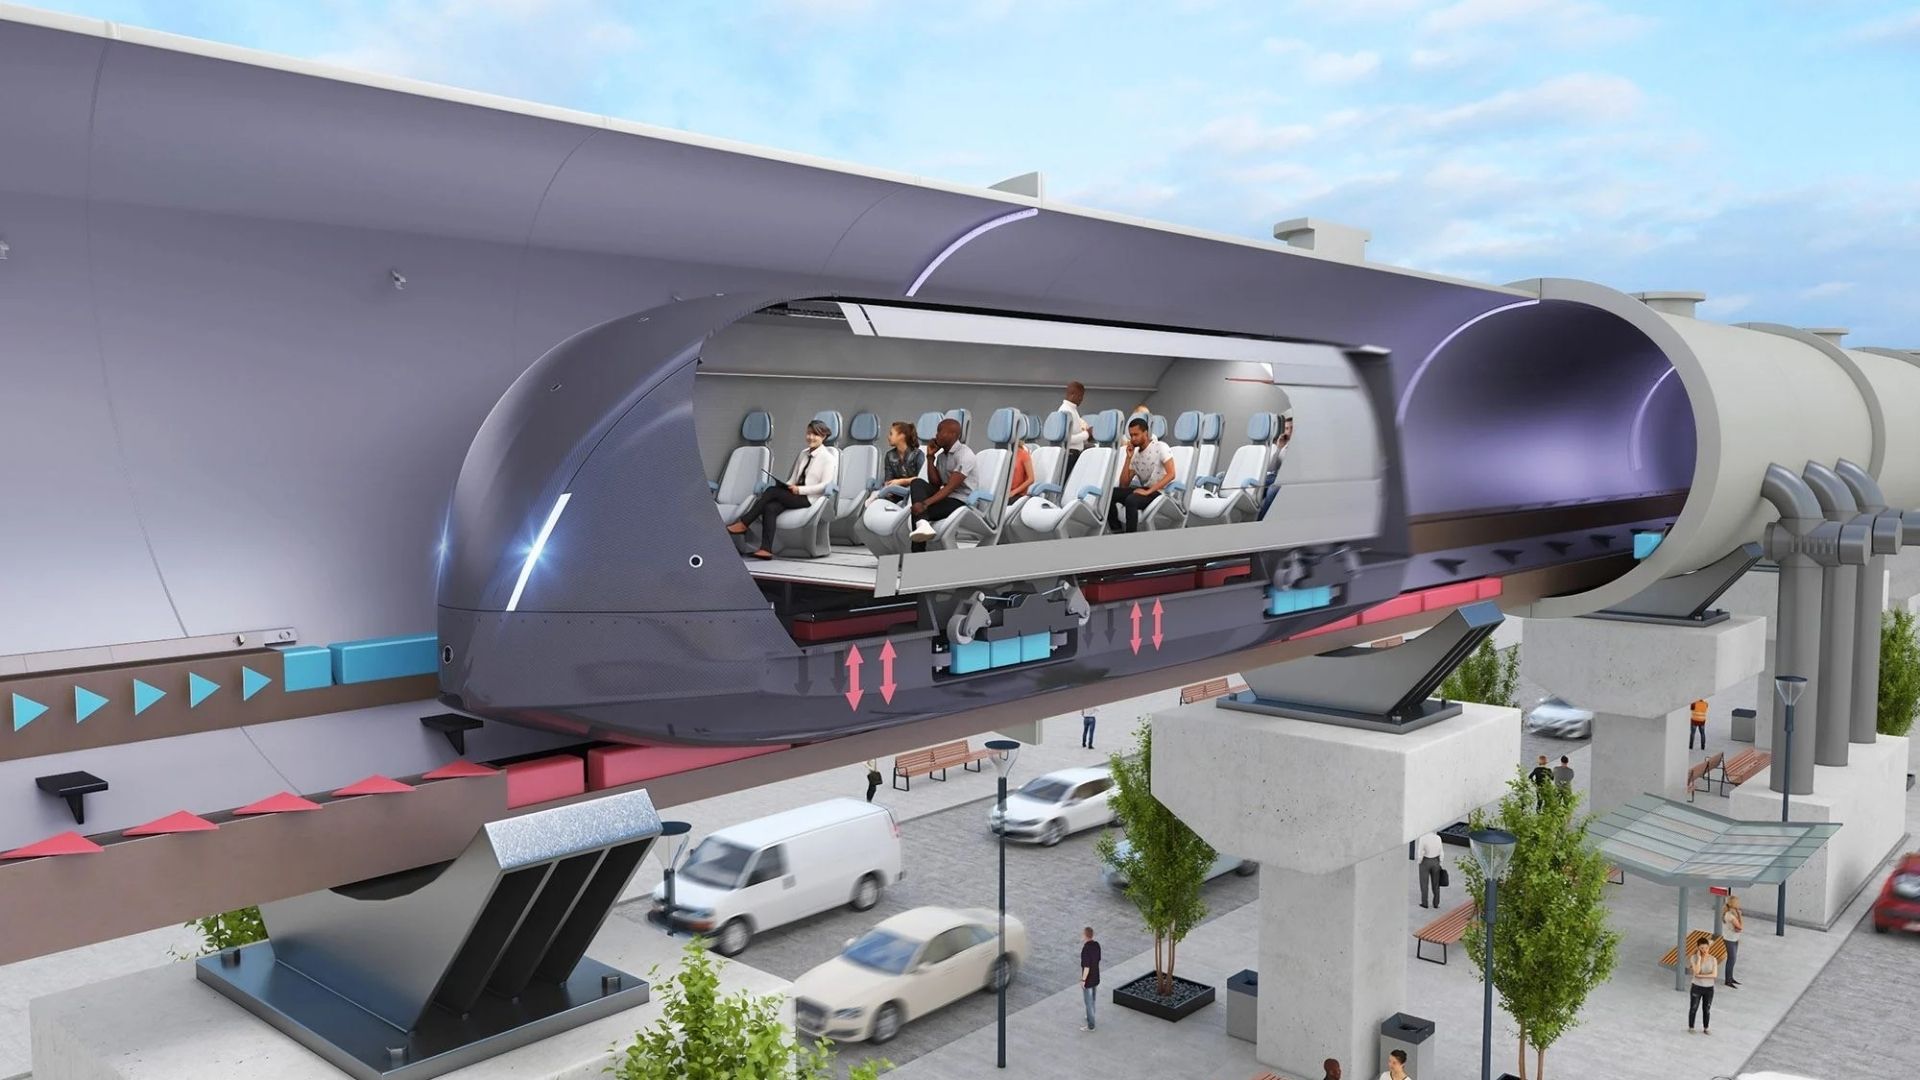 What Will Future Transportation Look Like